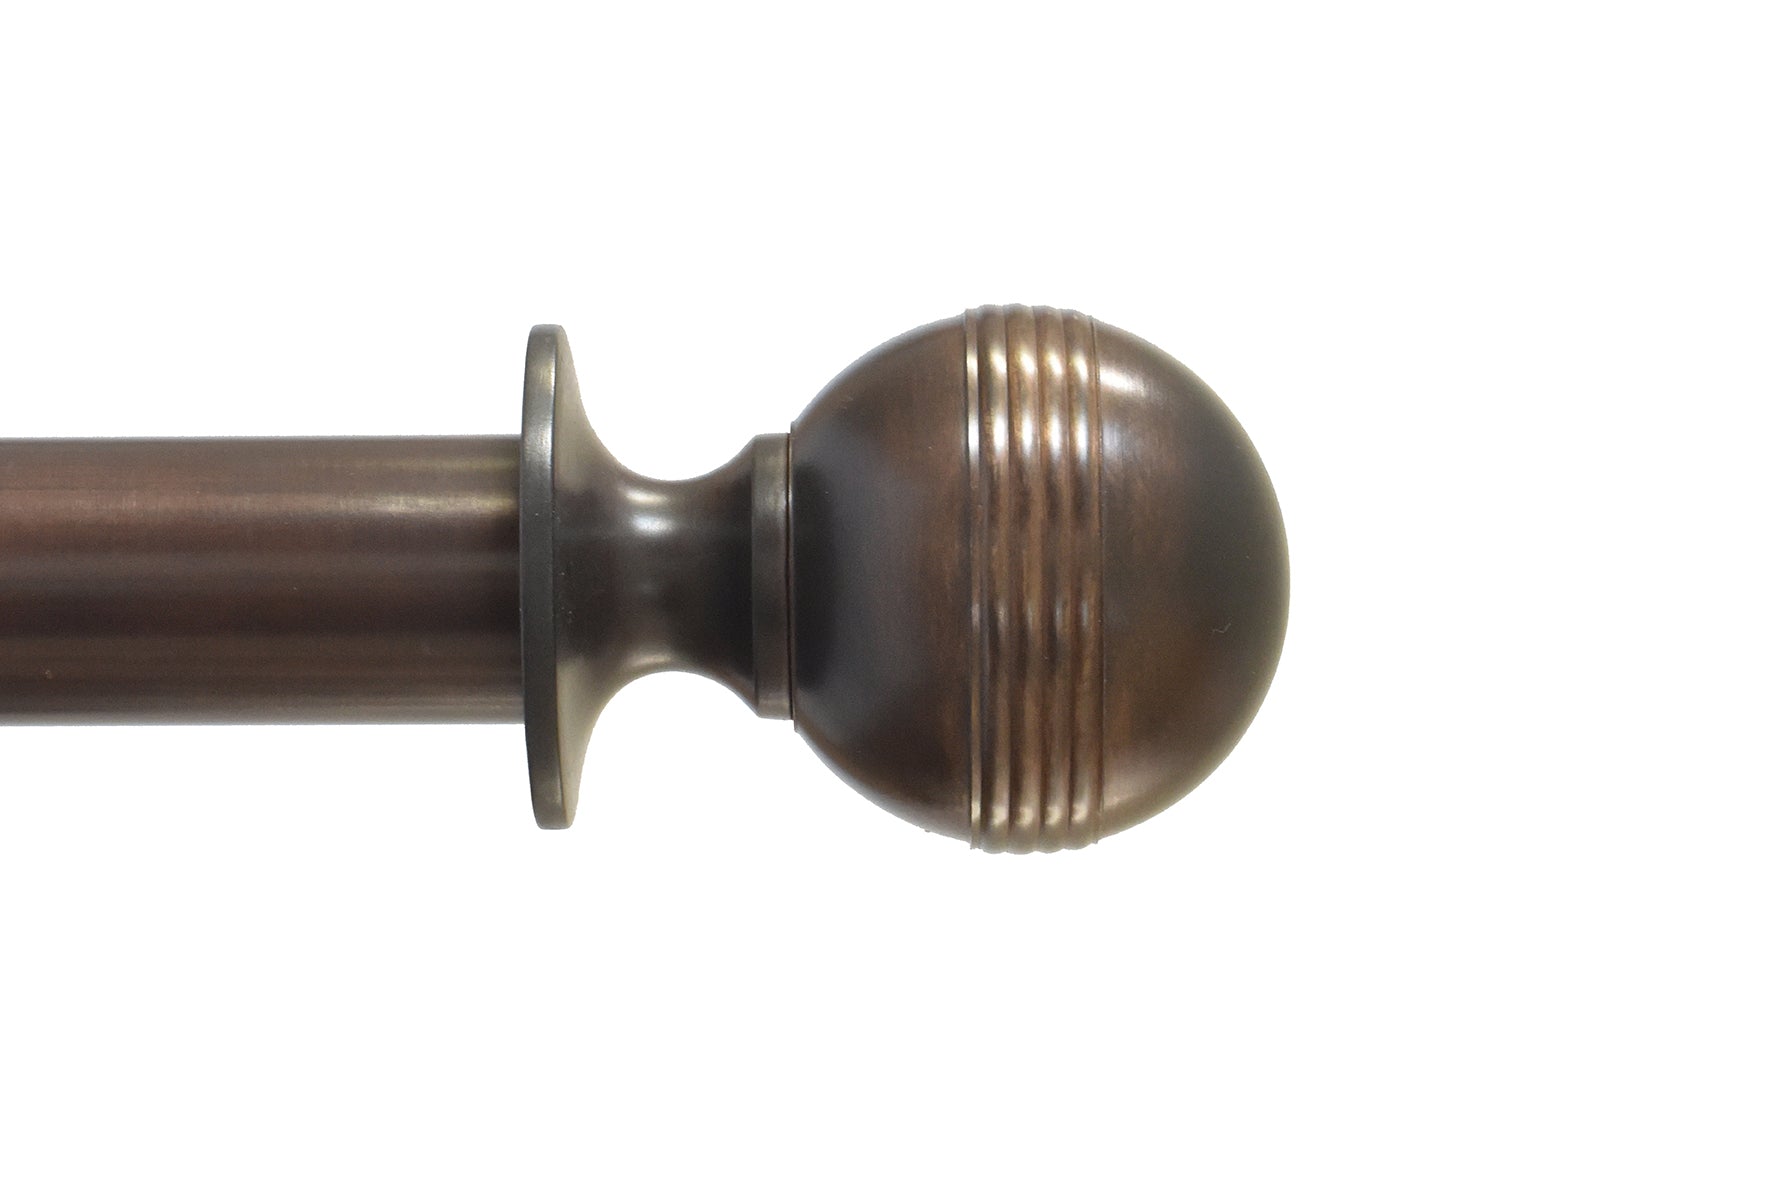 Tillys Classic Four Rib Ball Finial Curtain Pole Set in Bronze